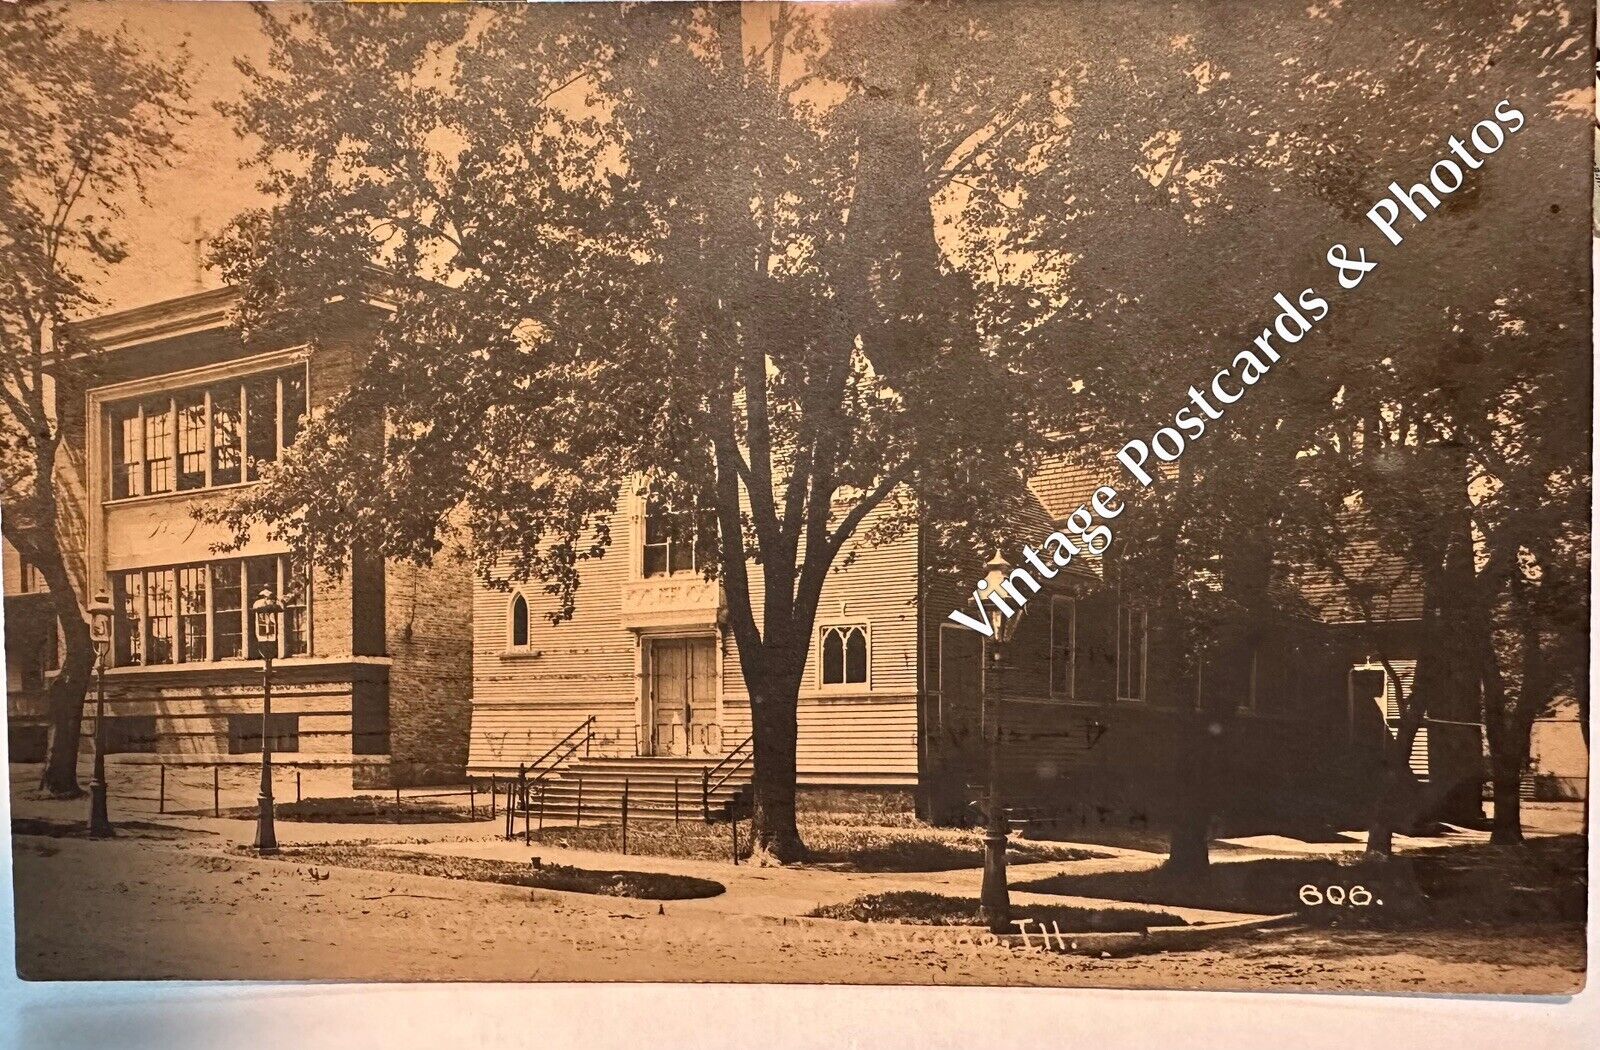 RPPC Chicago St. Jerome’s Church & School 1911 Charles R. Childs Rogers Park